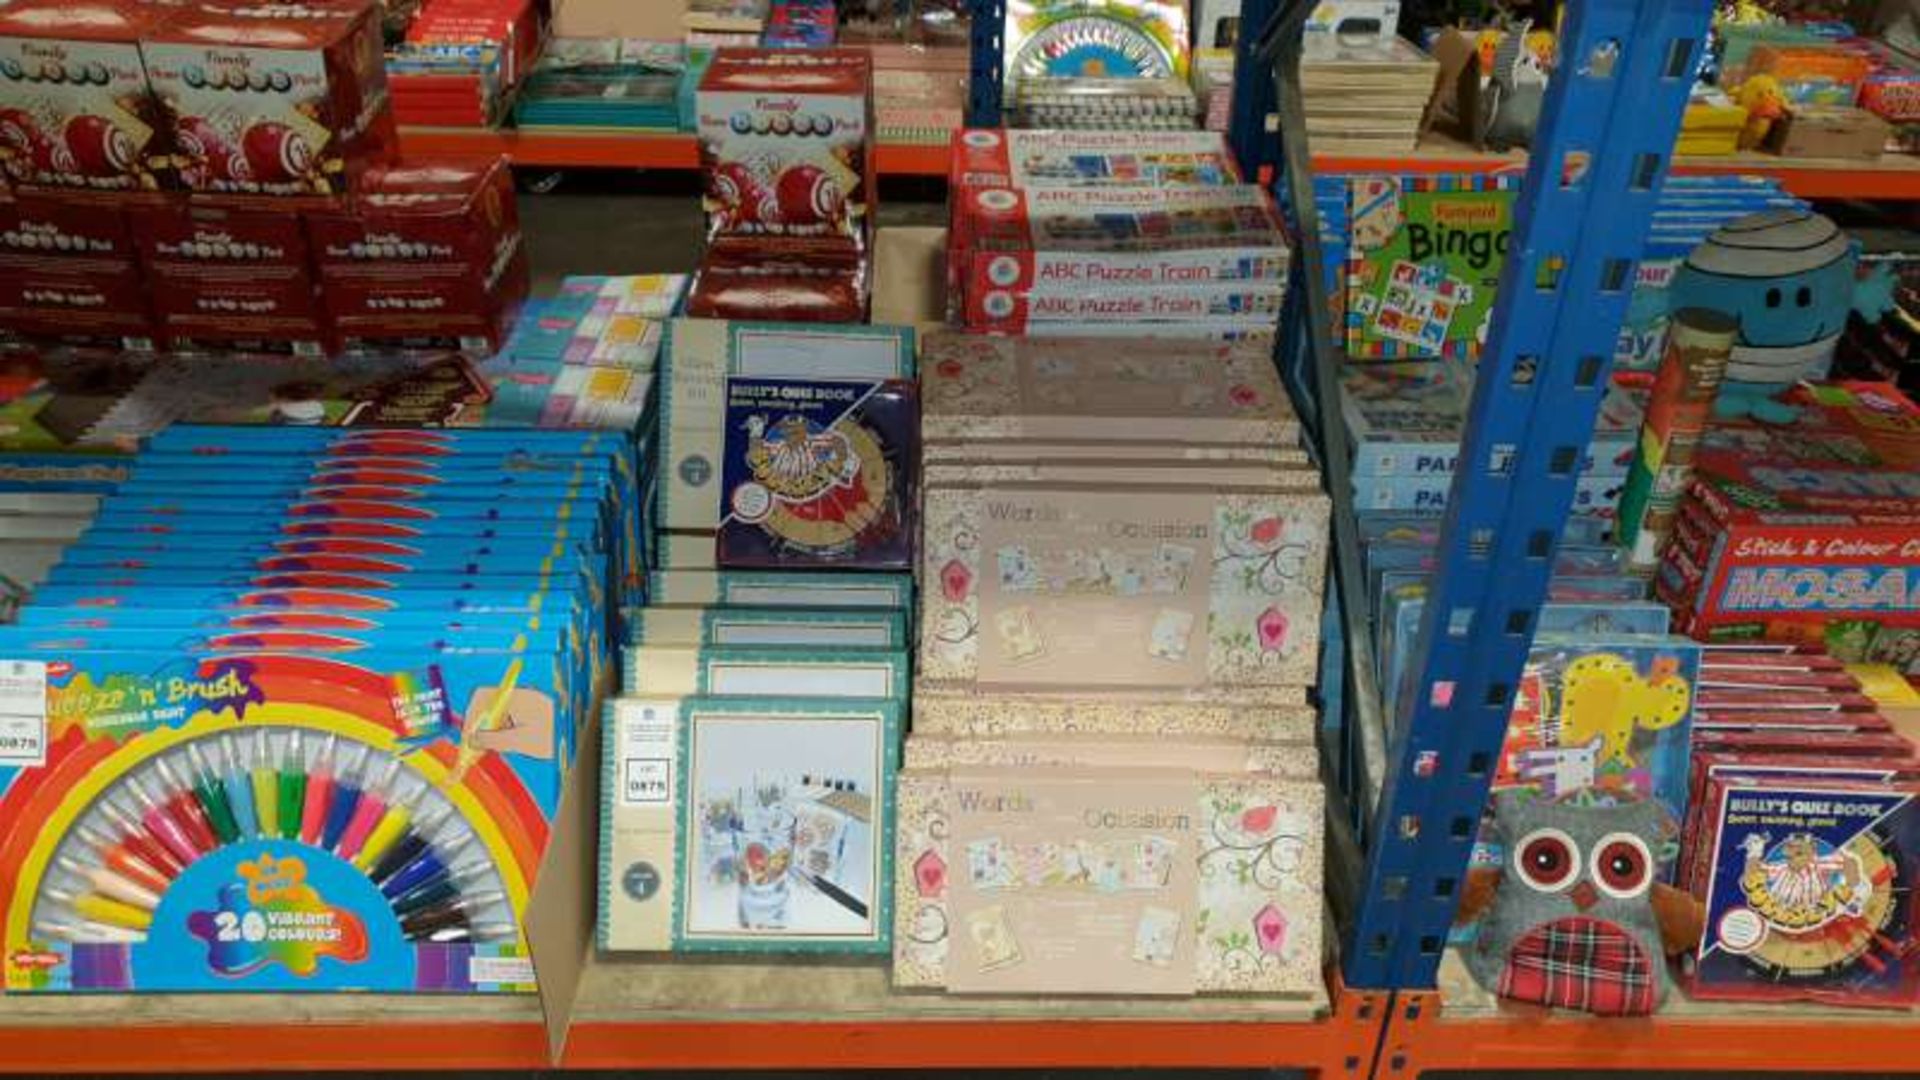 MIXED LOT CONTAINING GLASS PAINTING KITS, ABC PUZZLE TRAIN, FAMILY BINGO, WORDS FOR EVERY OCCASION